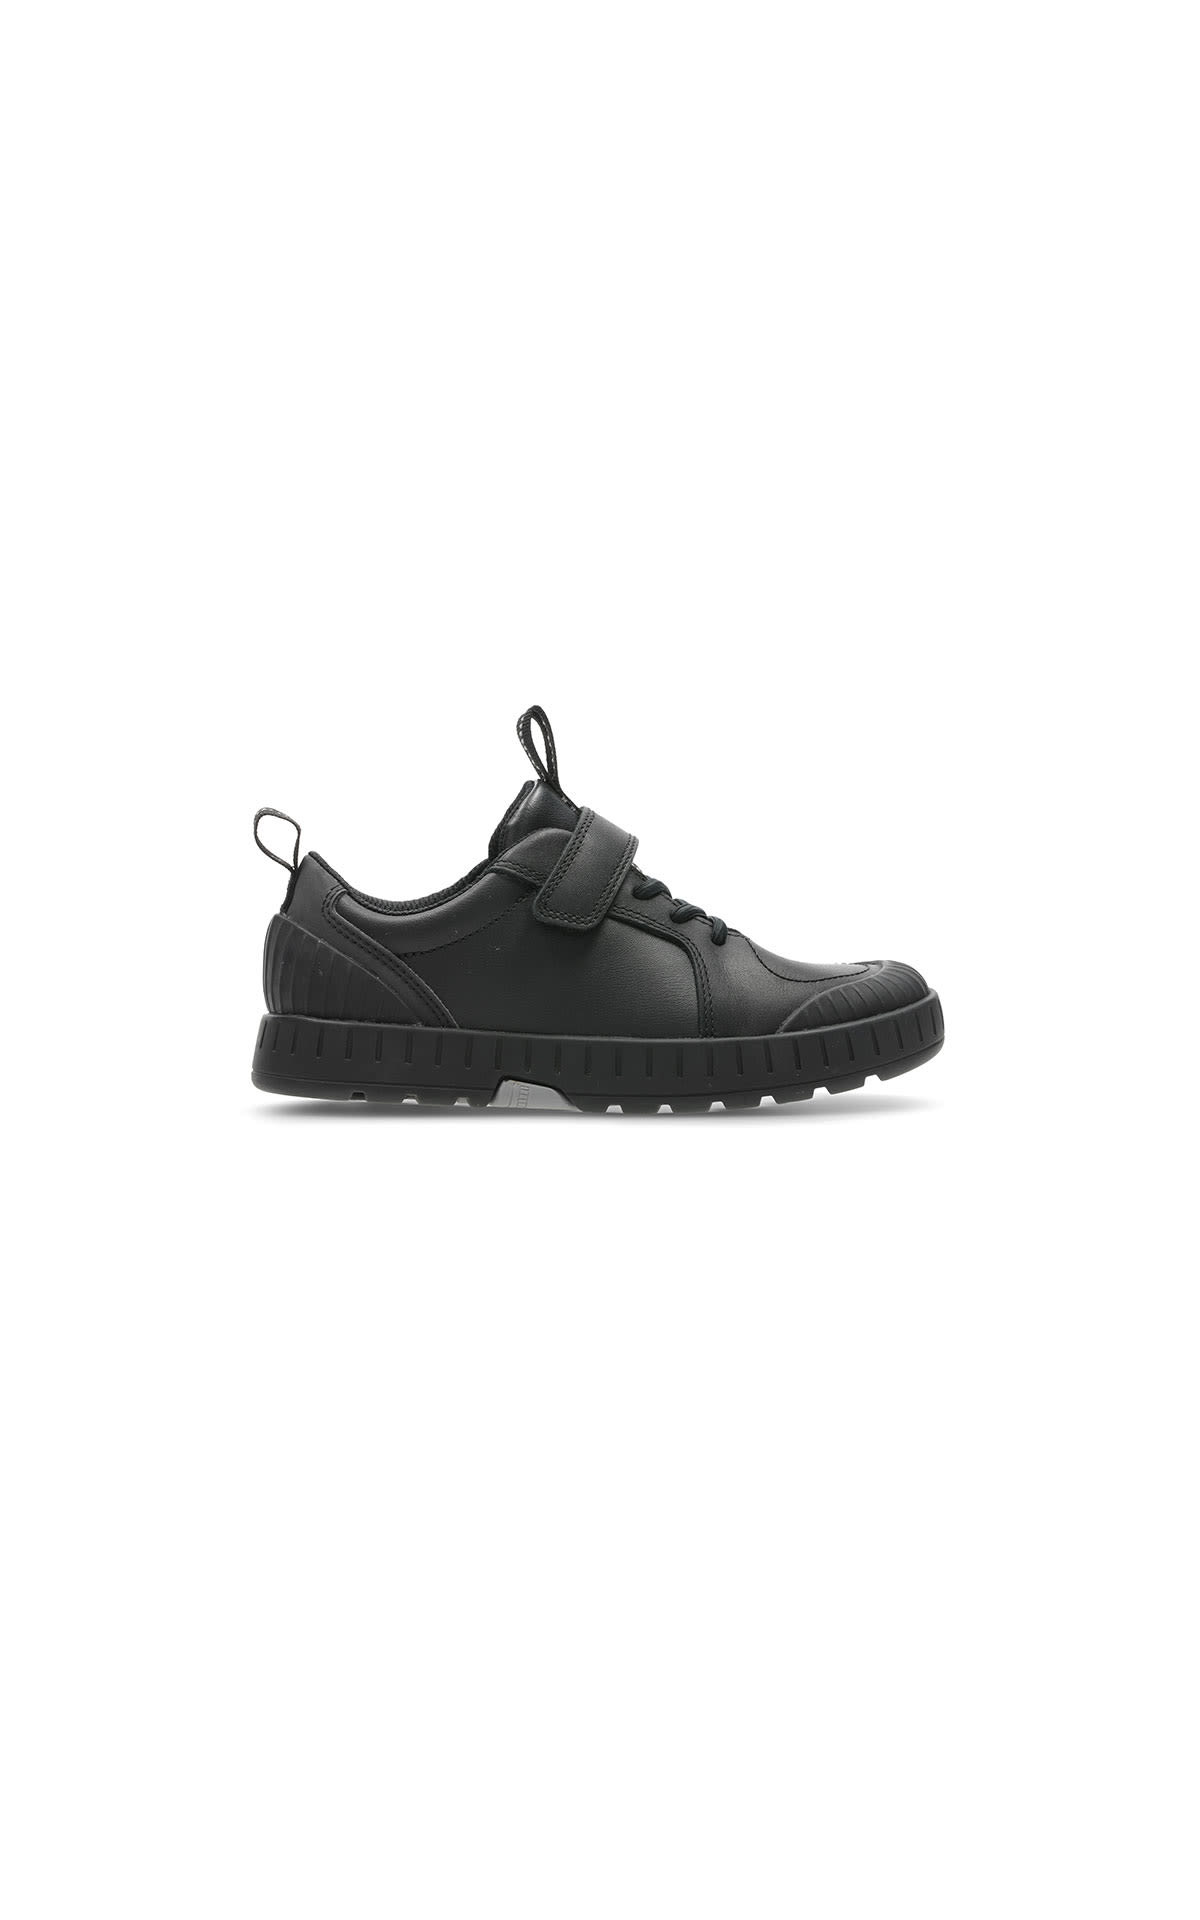 Clarks Apollo step black from Bicester Village